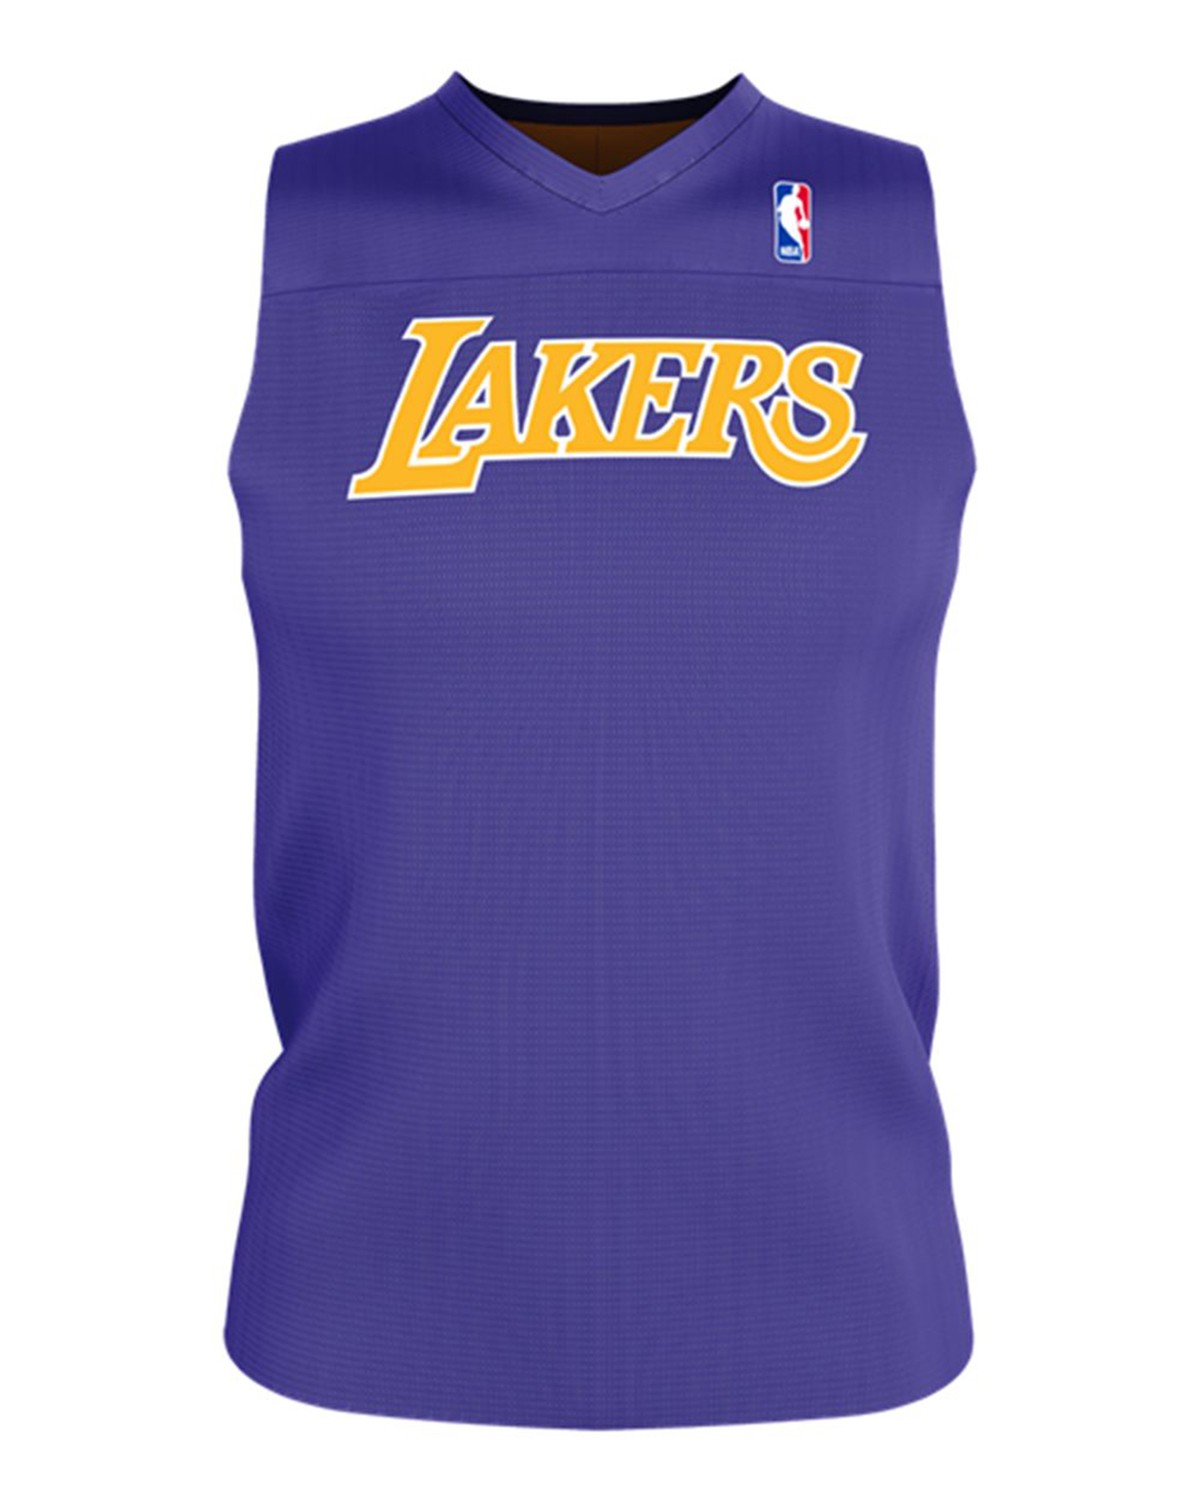 NBA Digital File Basketball Jersey Design Purple Full Sublimation Design  Sportswear Sports With Jersey Template and Mockup PSD 